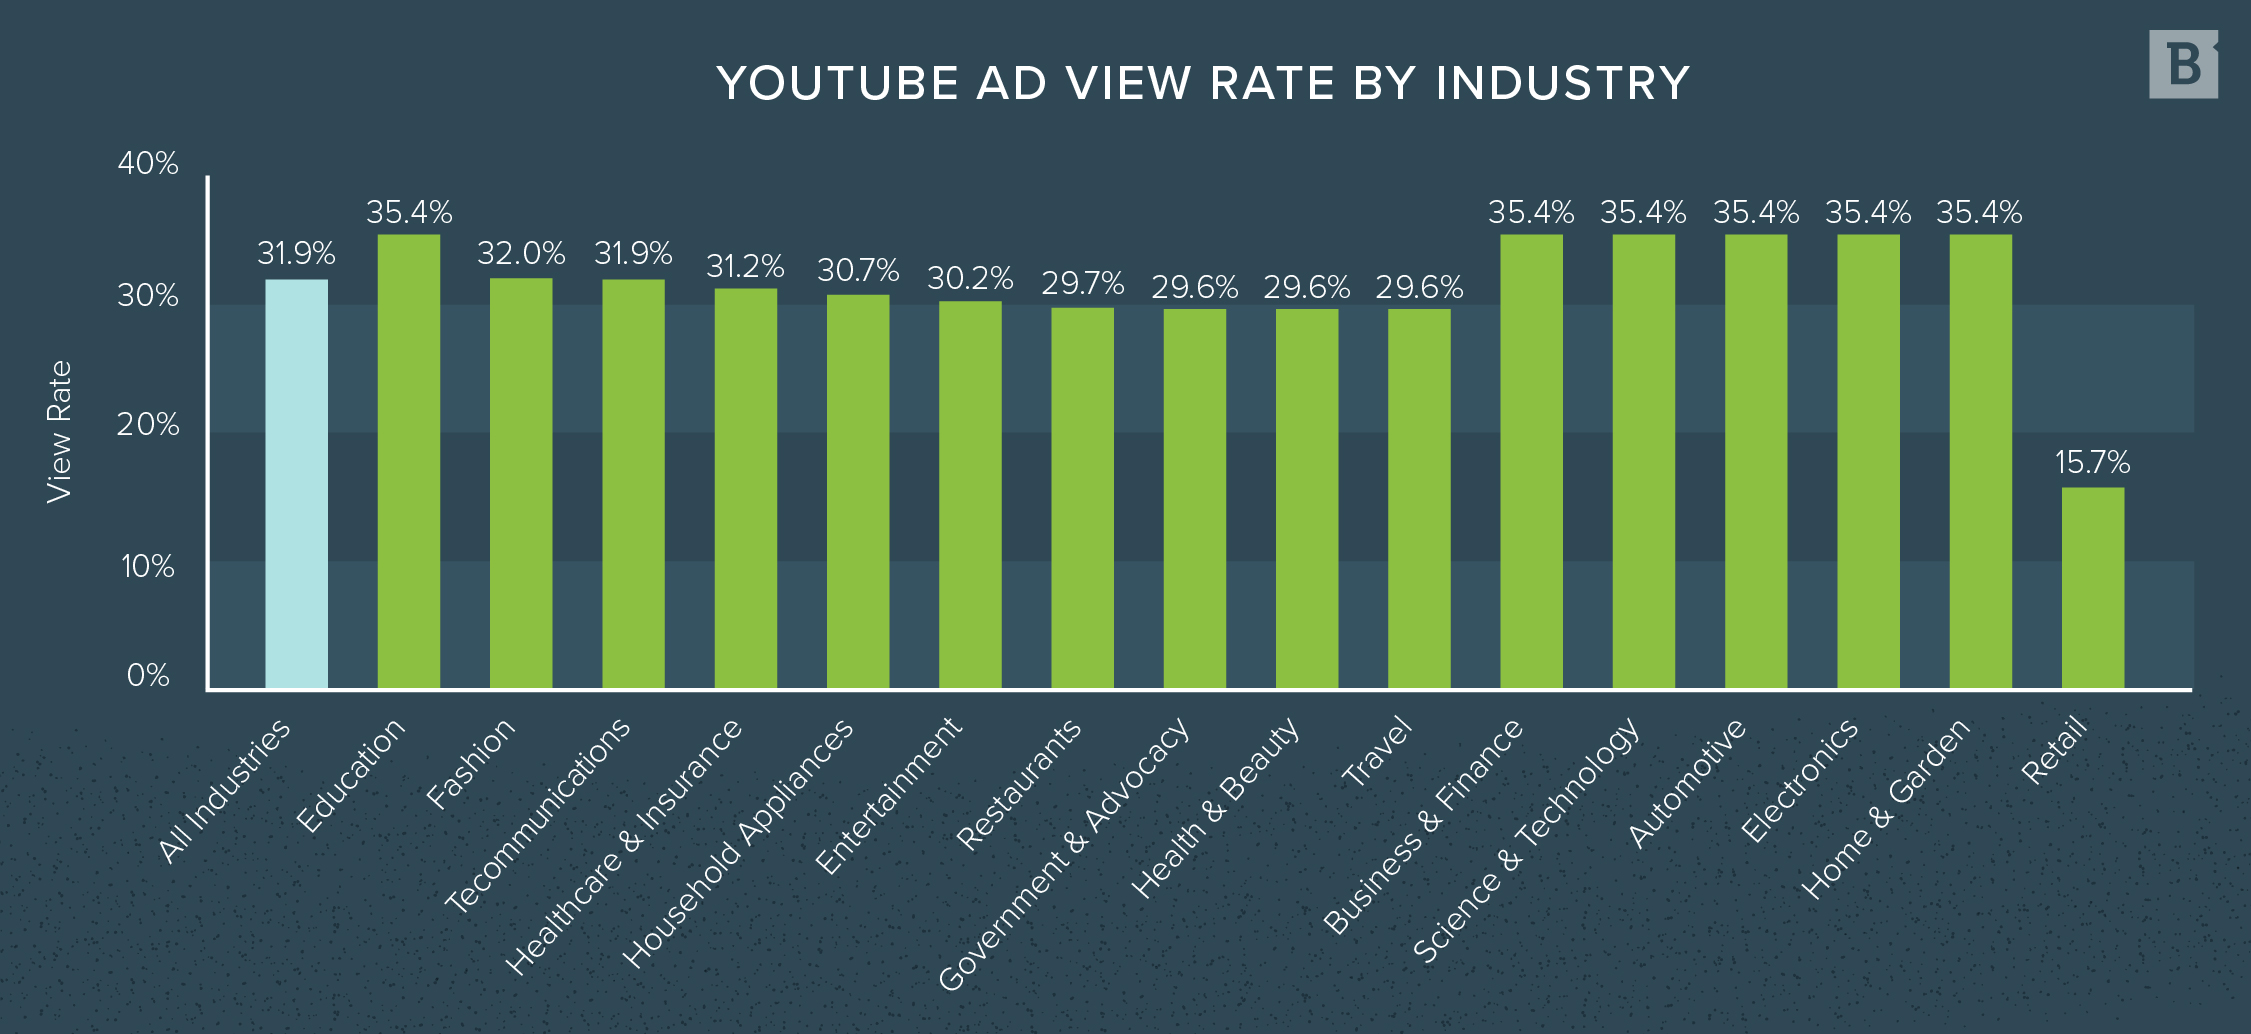 YouTube ad view rate by industry